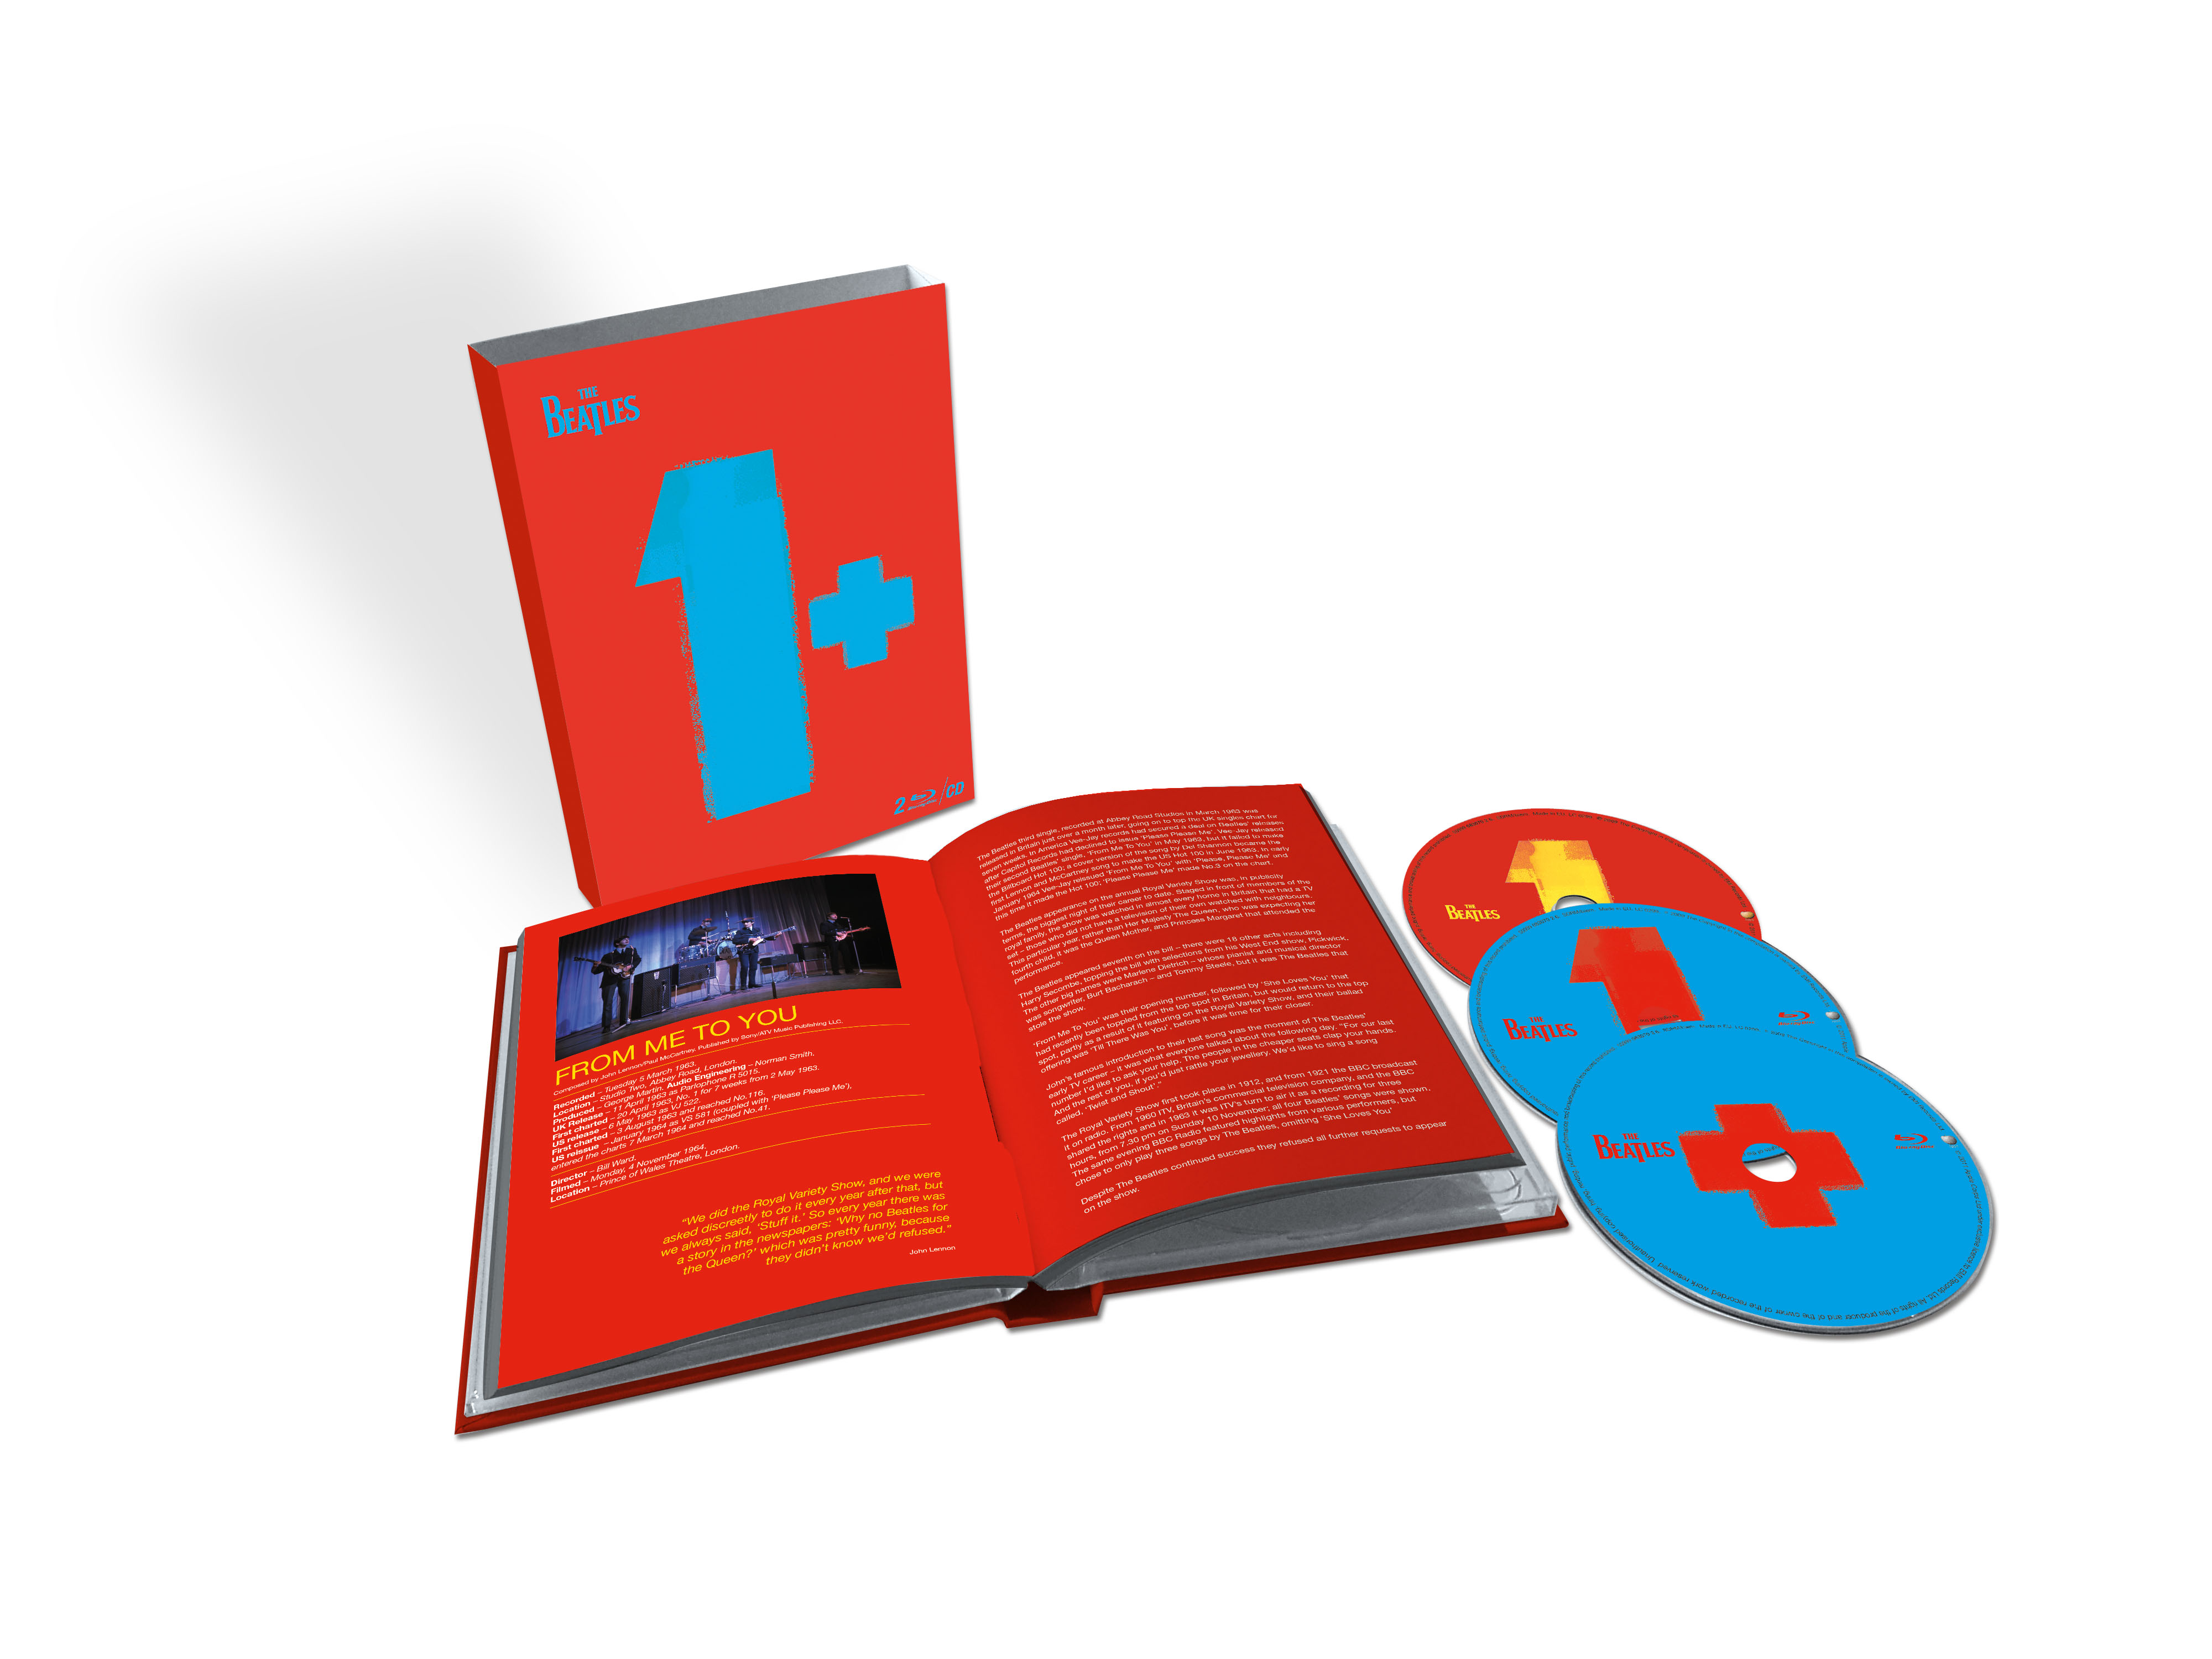 The Beatles + (CD - Blu-ray Blu-ray) Deluxe CD Disc) 2 Edition 1 - + (Ltd